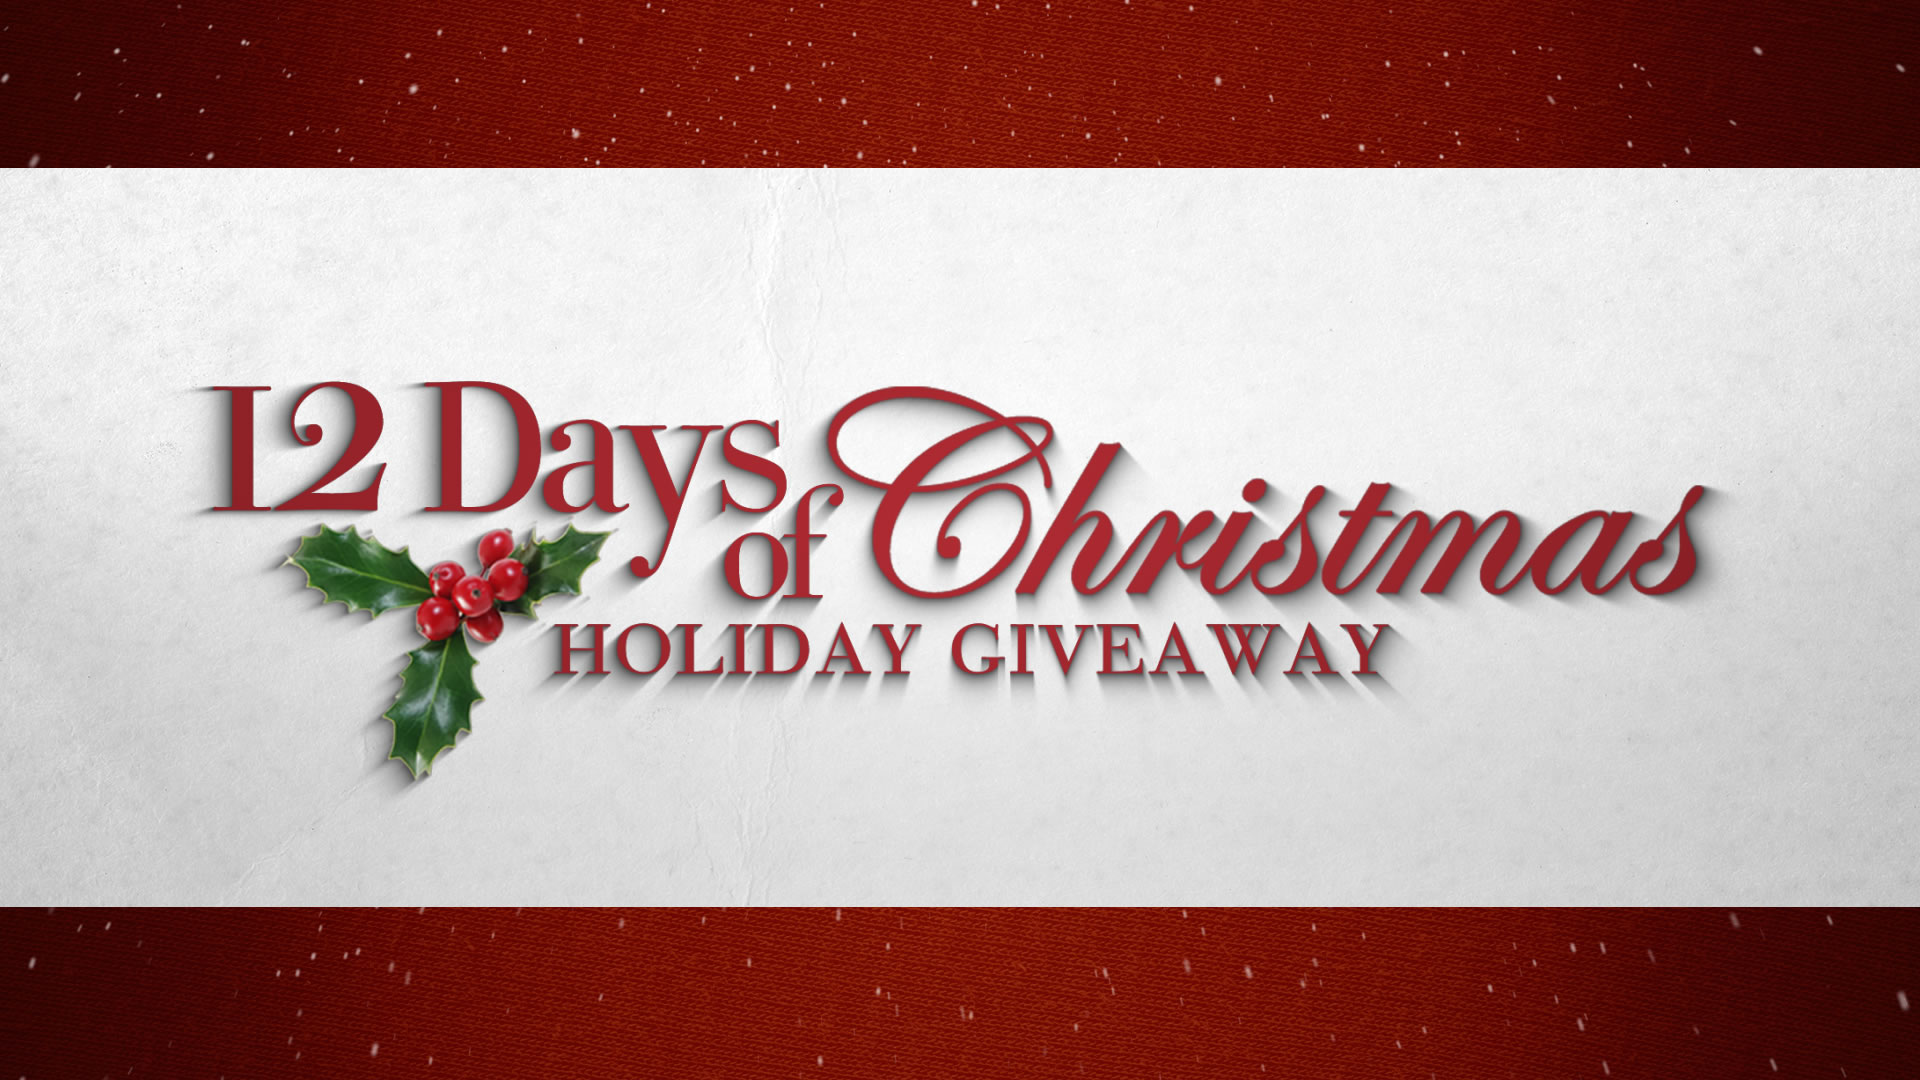 The View' celebrates the season with 12 Days of Holidays giveaway